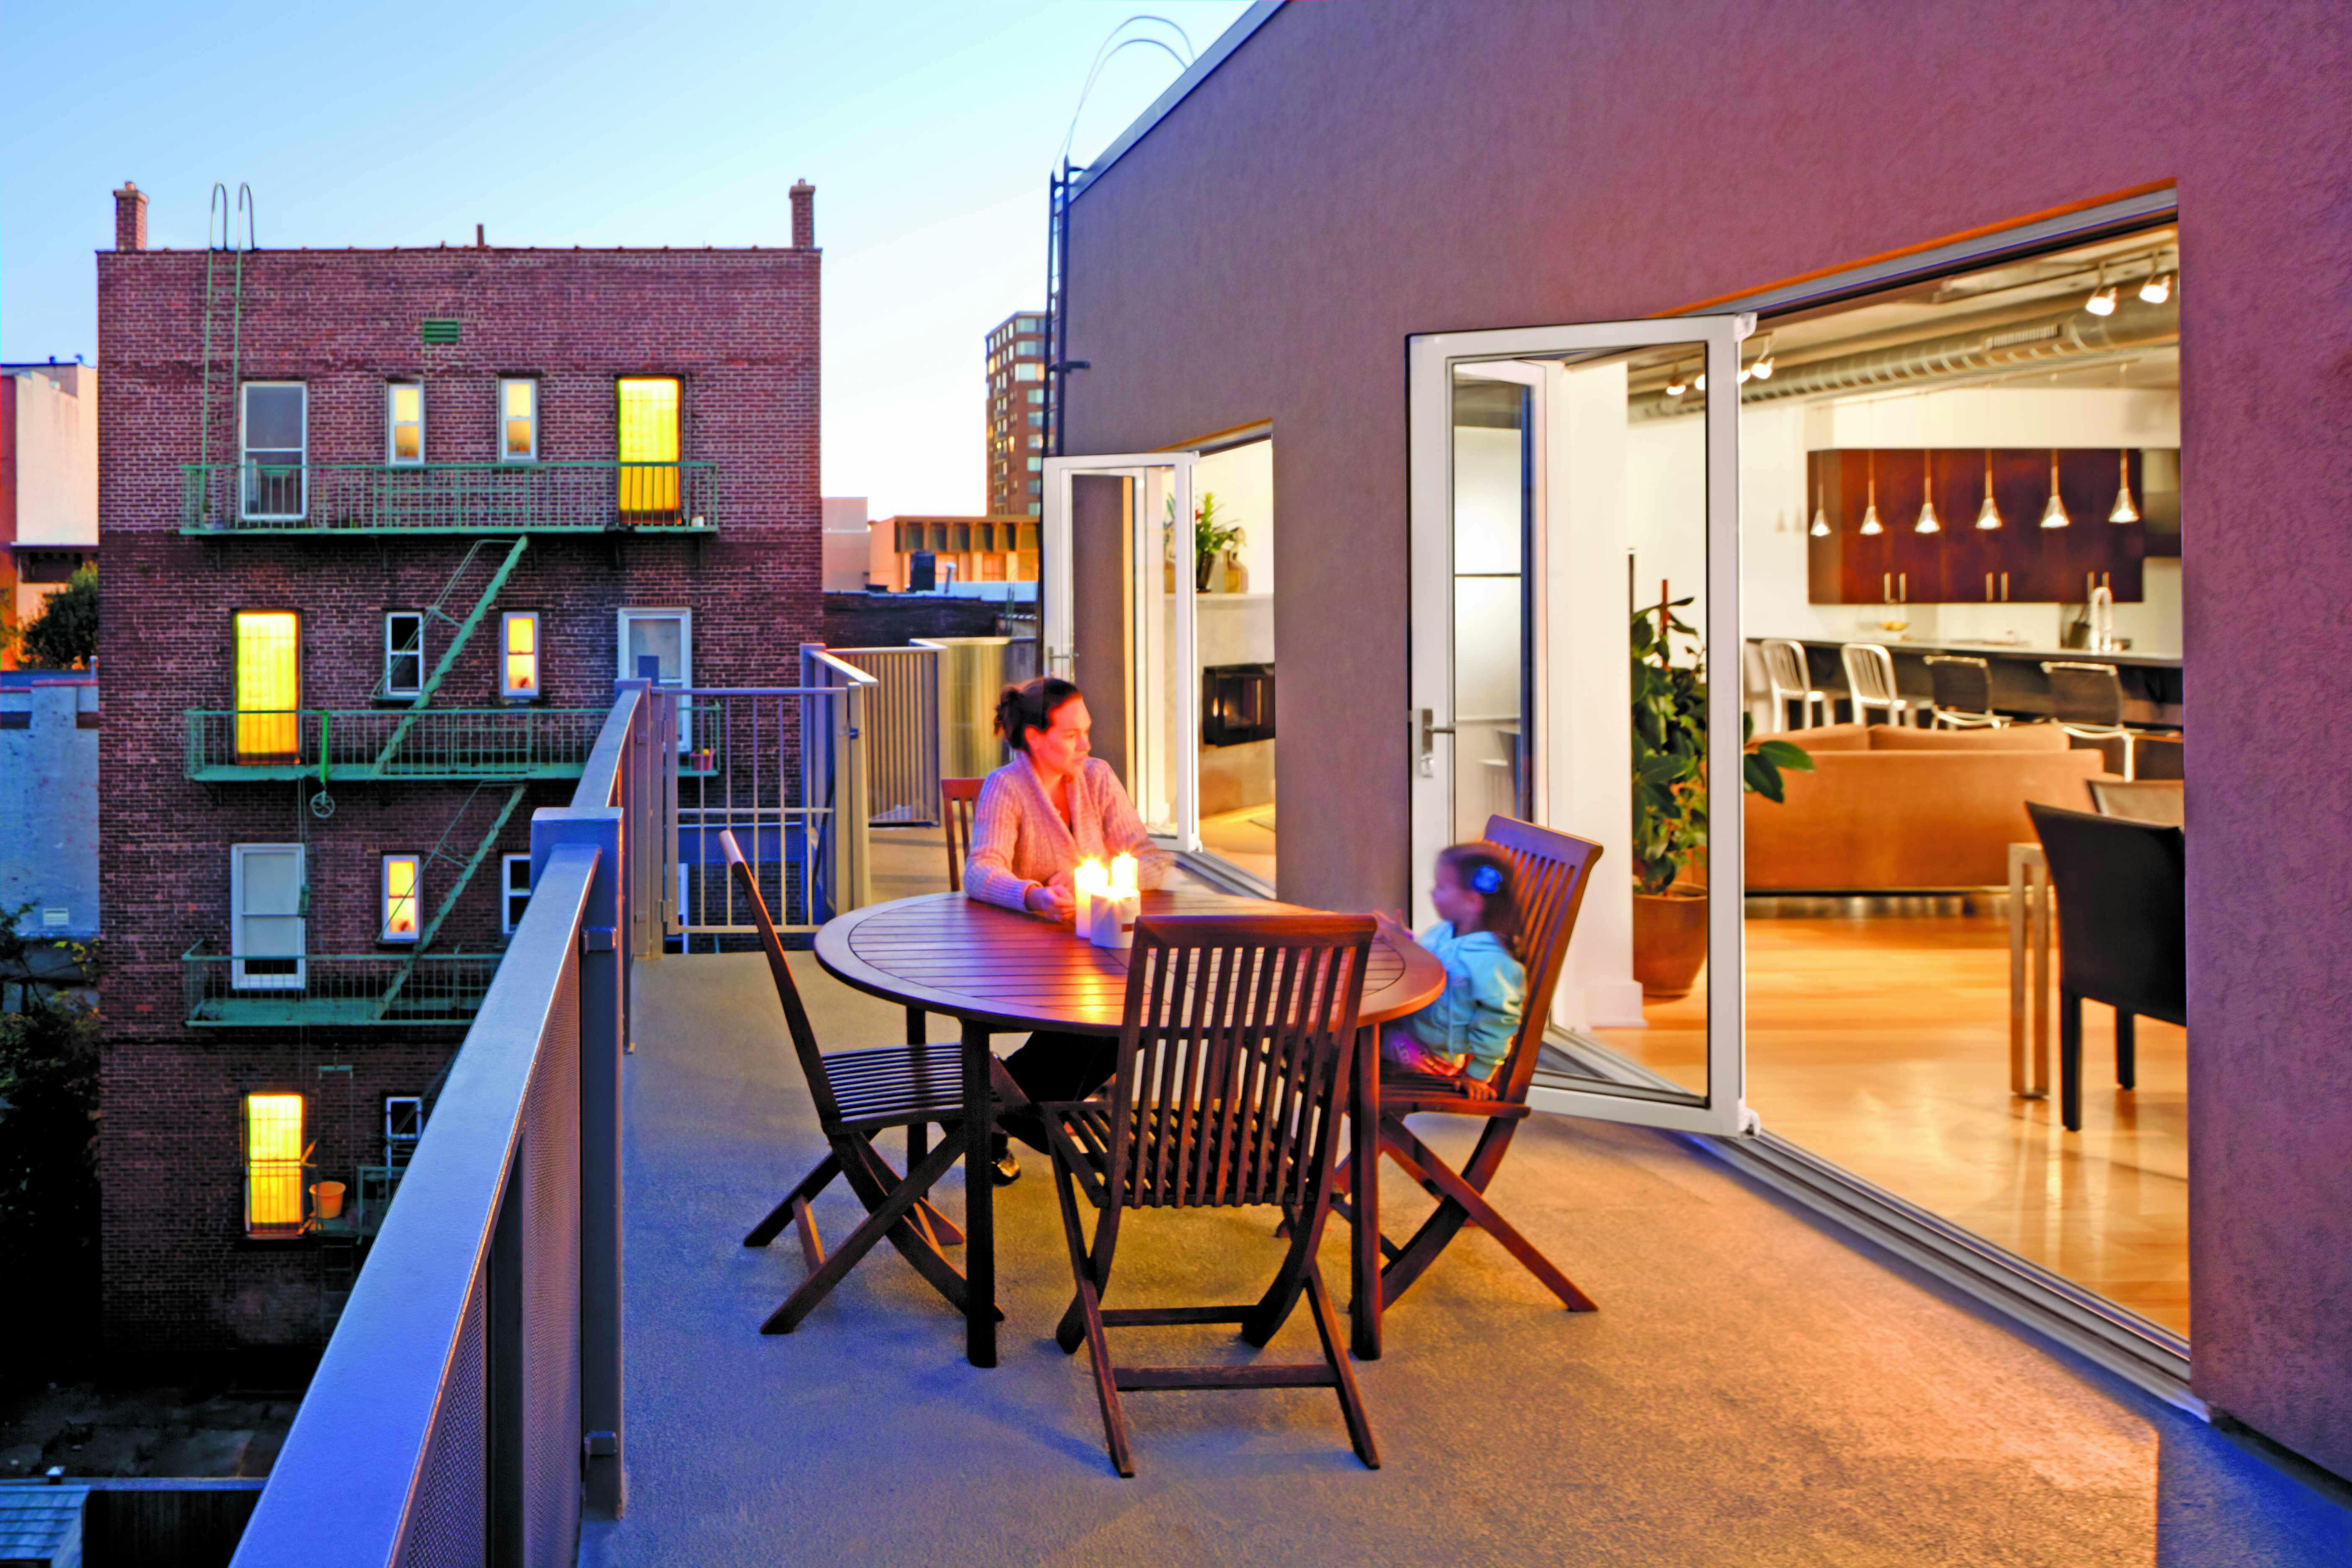 urban-multifamily-residential-deck-with-glass-walls-and-mother-and-child